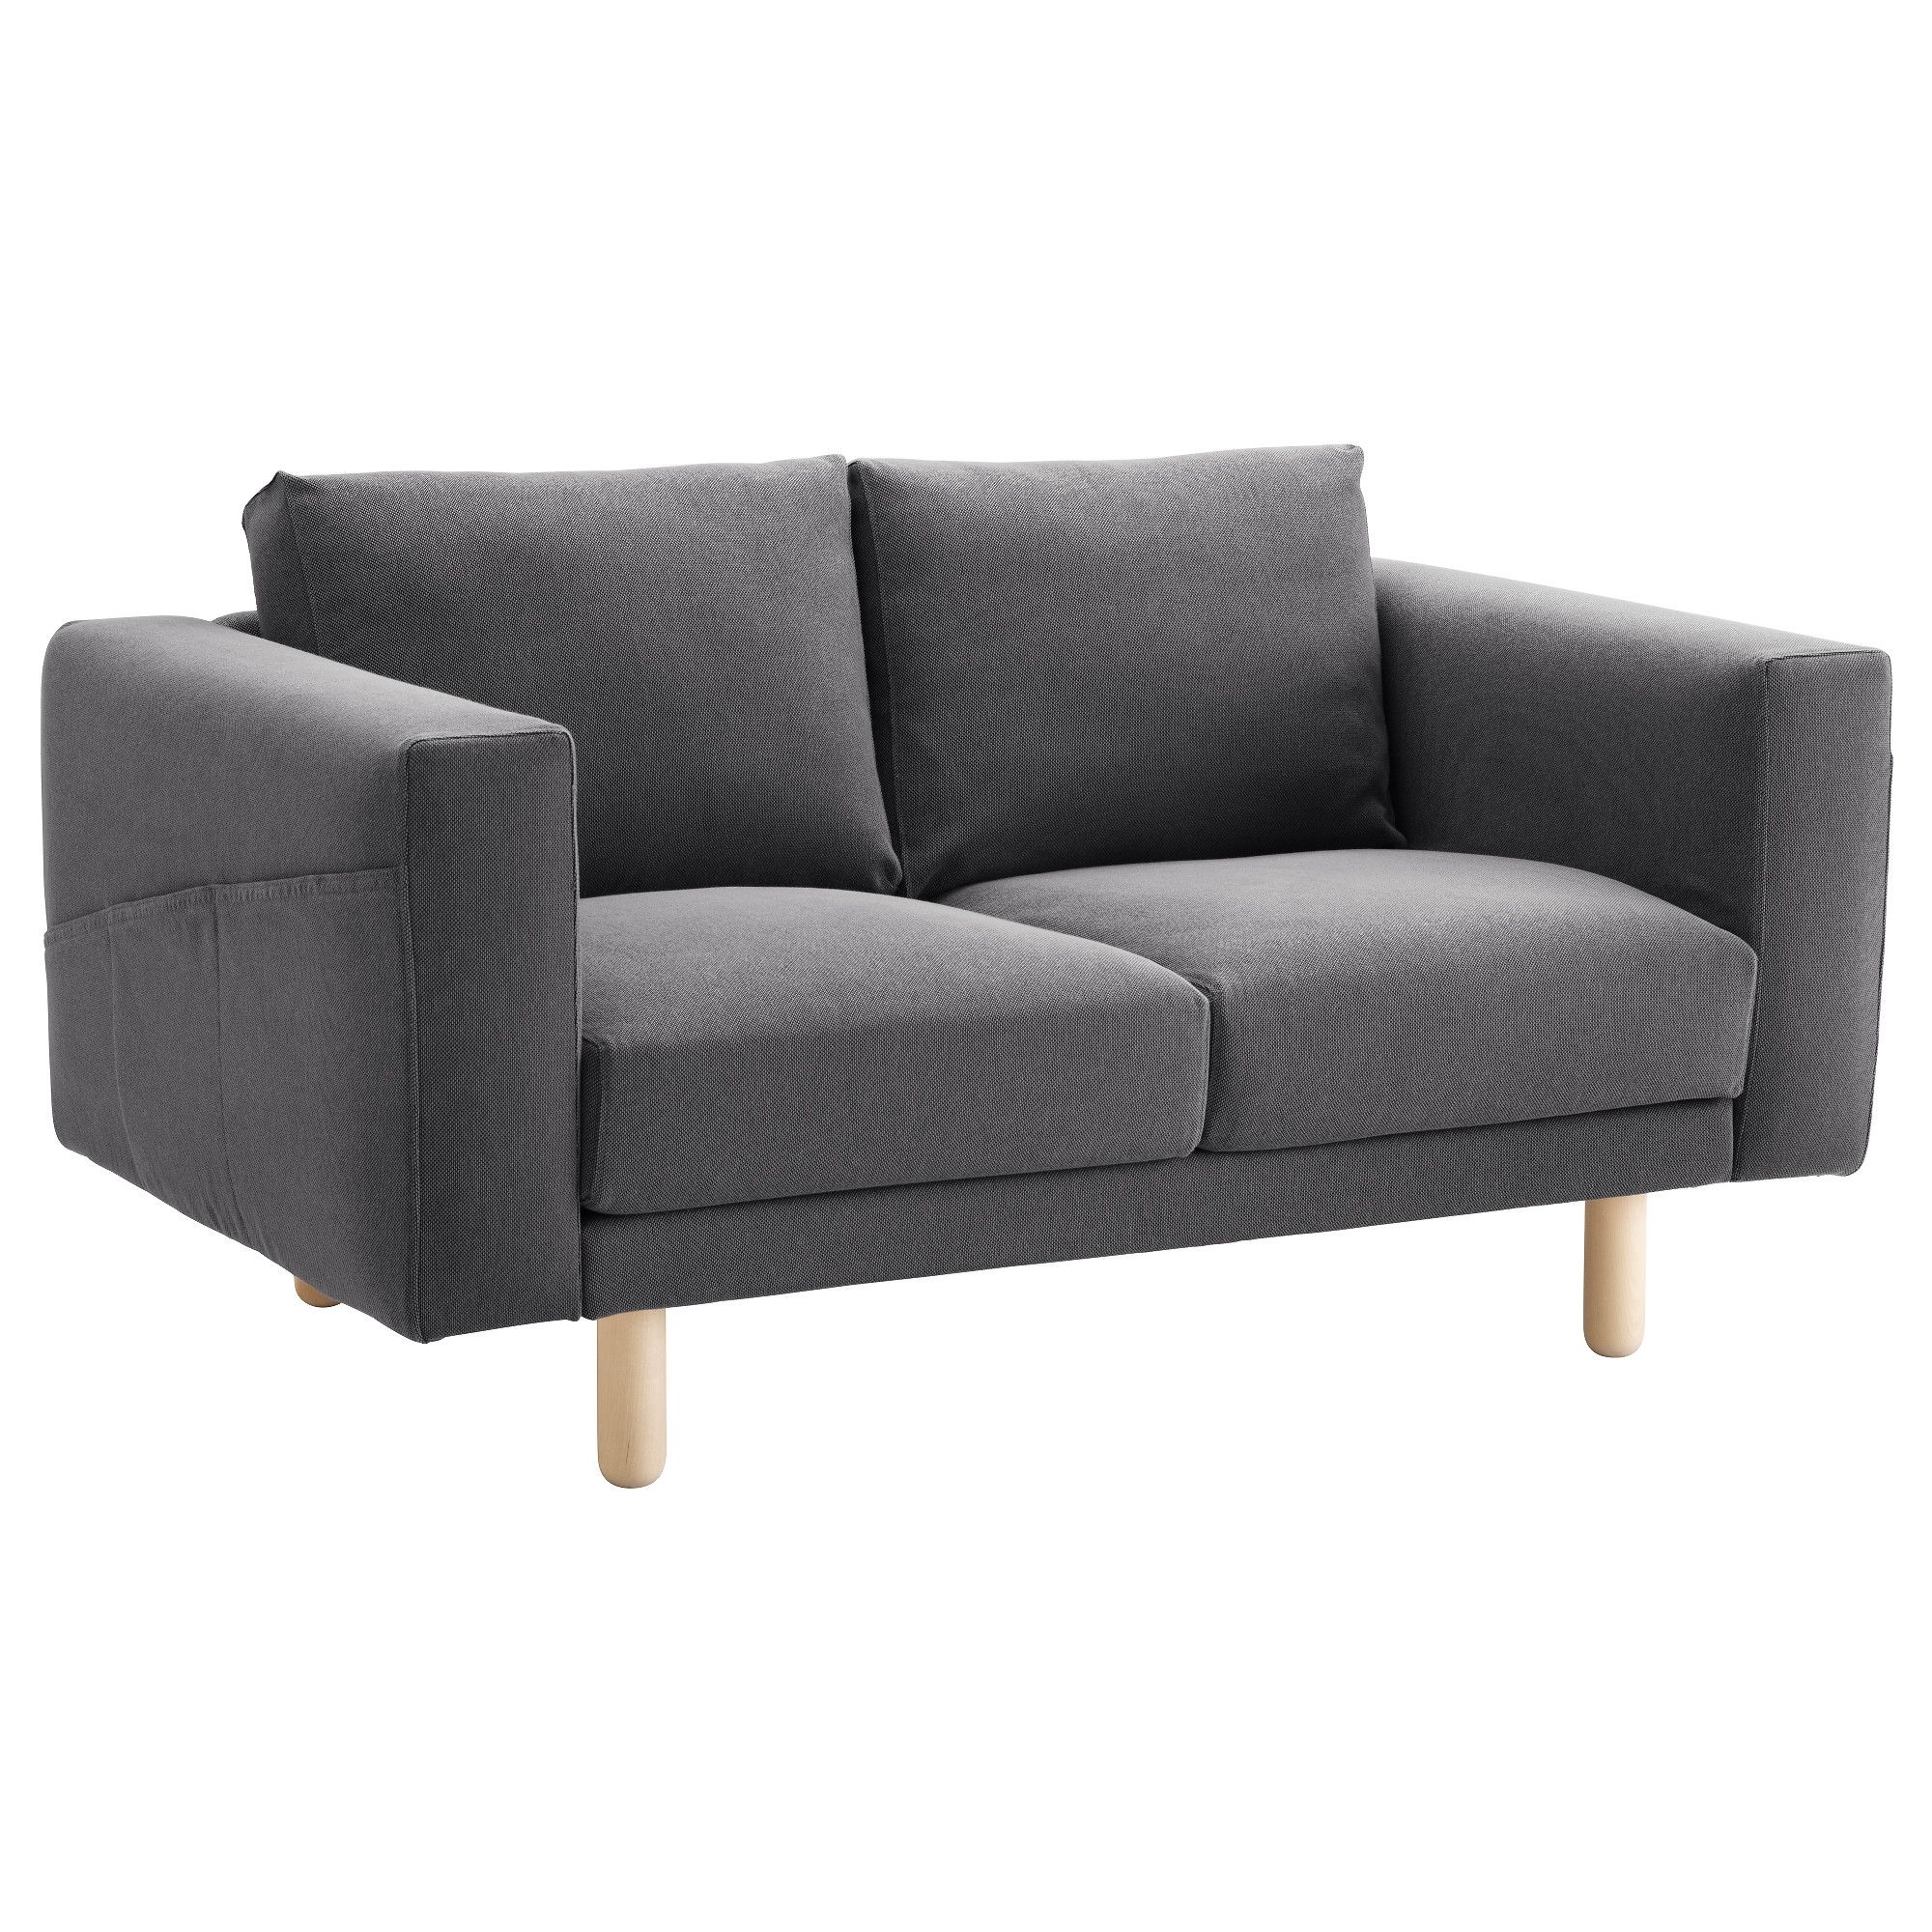 Norsborg 2 Seat Sofa Finnsta Dark Grey/birch – Ikea With Well Known Ikea Two Seater Sofas (View 5 of 20)